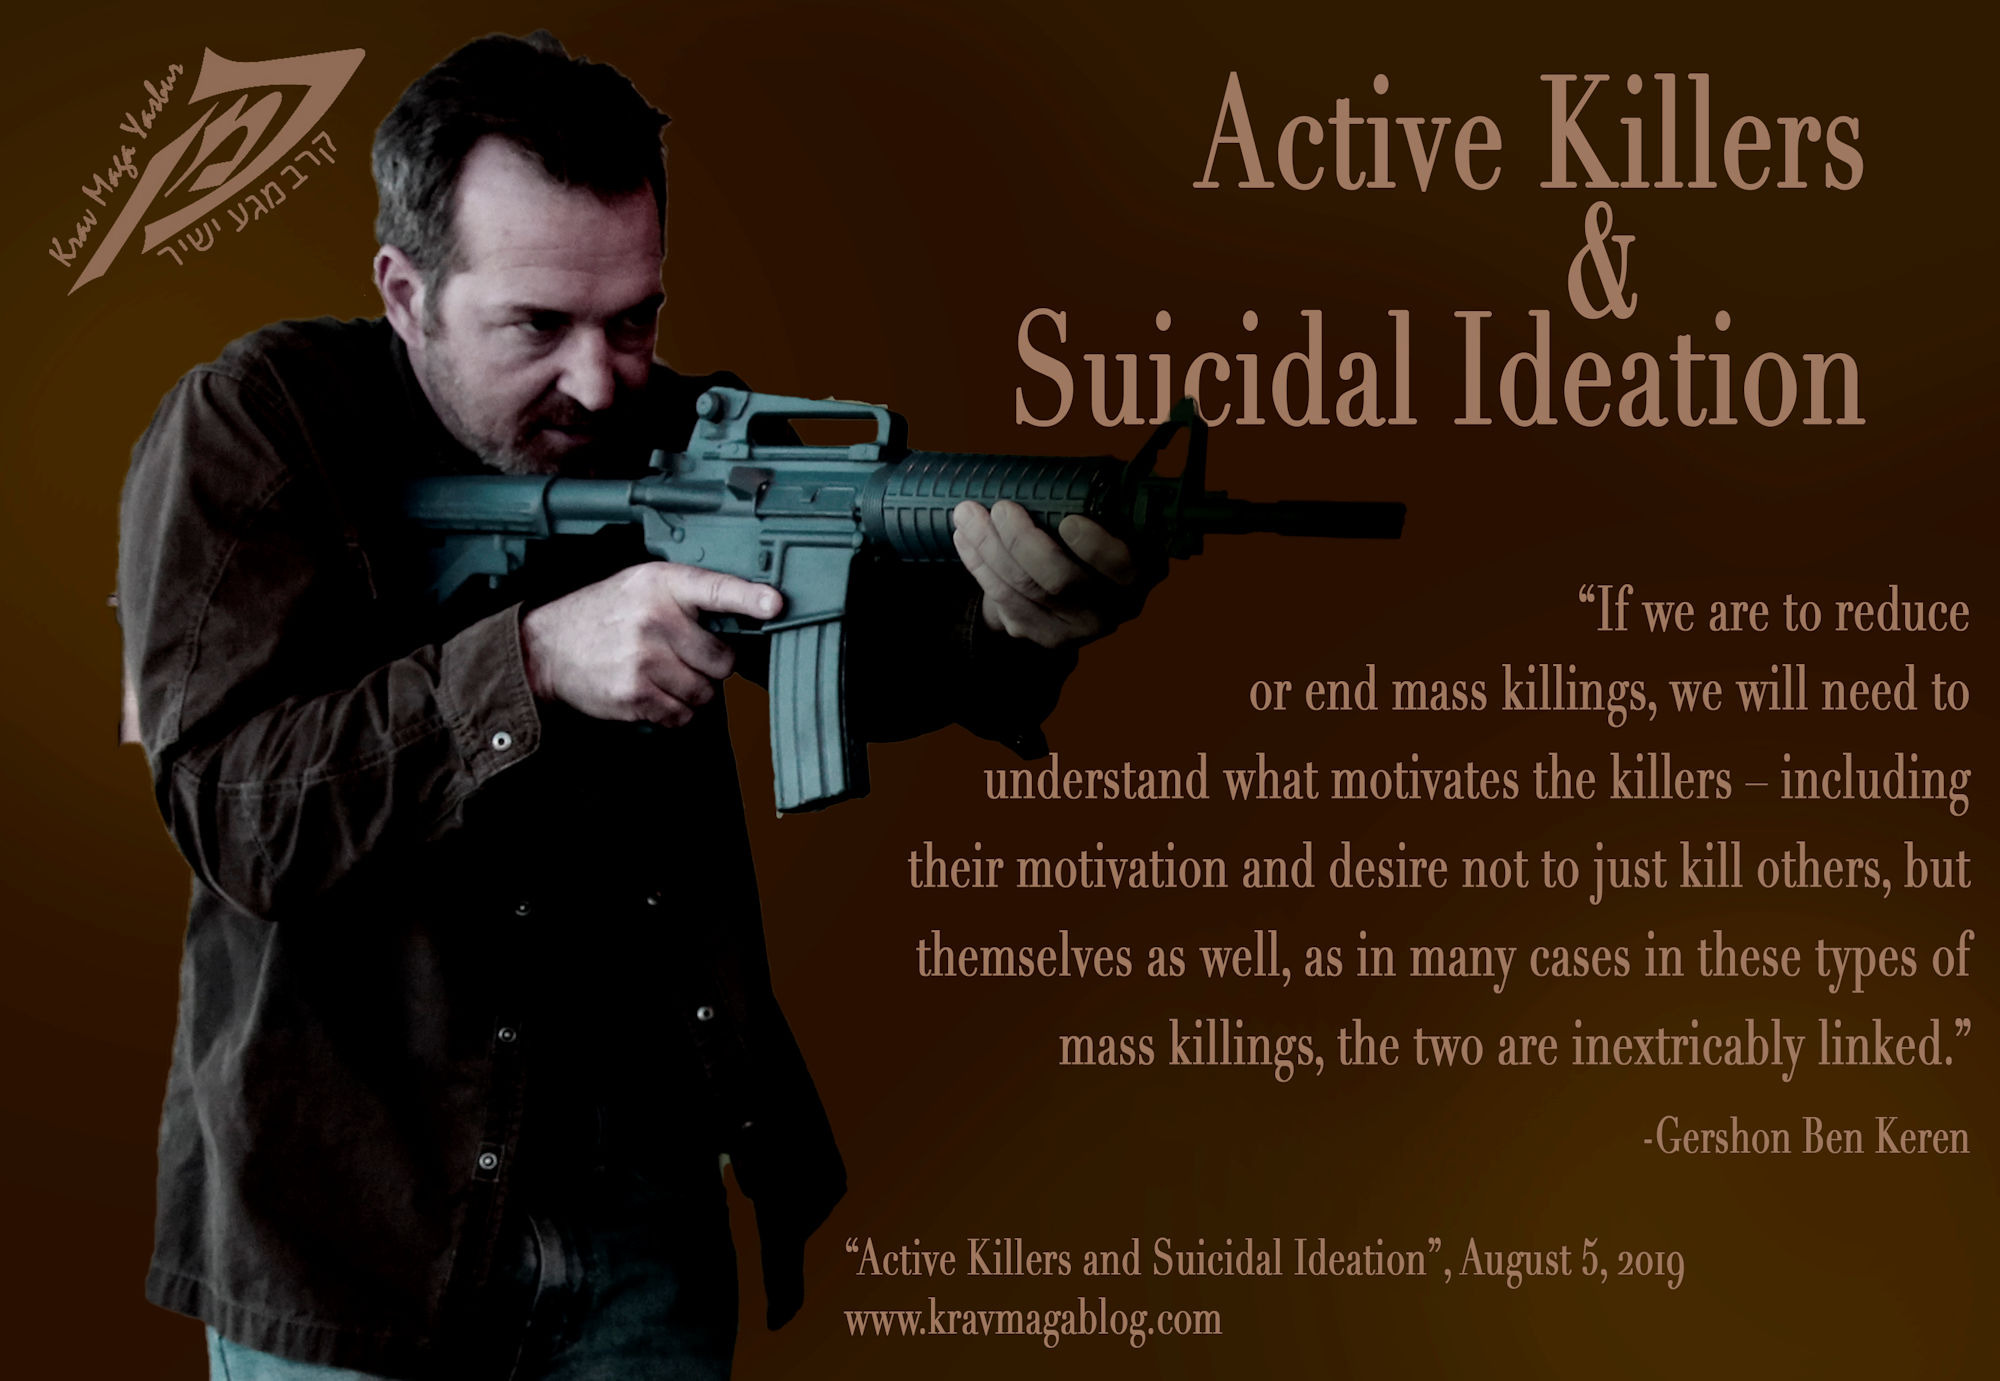 Active Killers & Suicidal Ideation